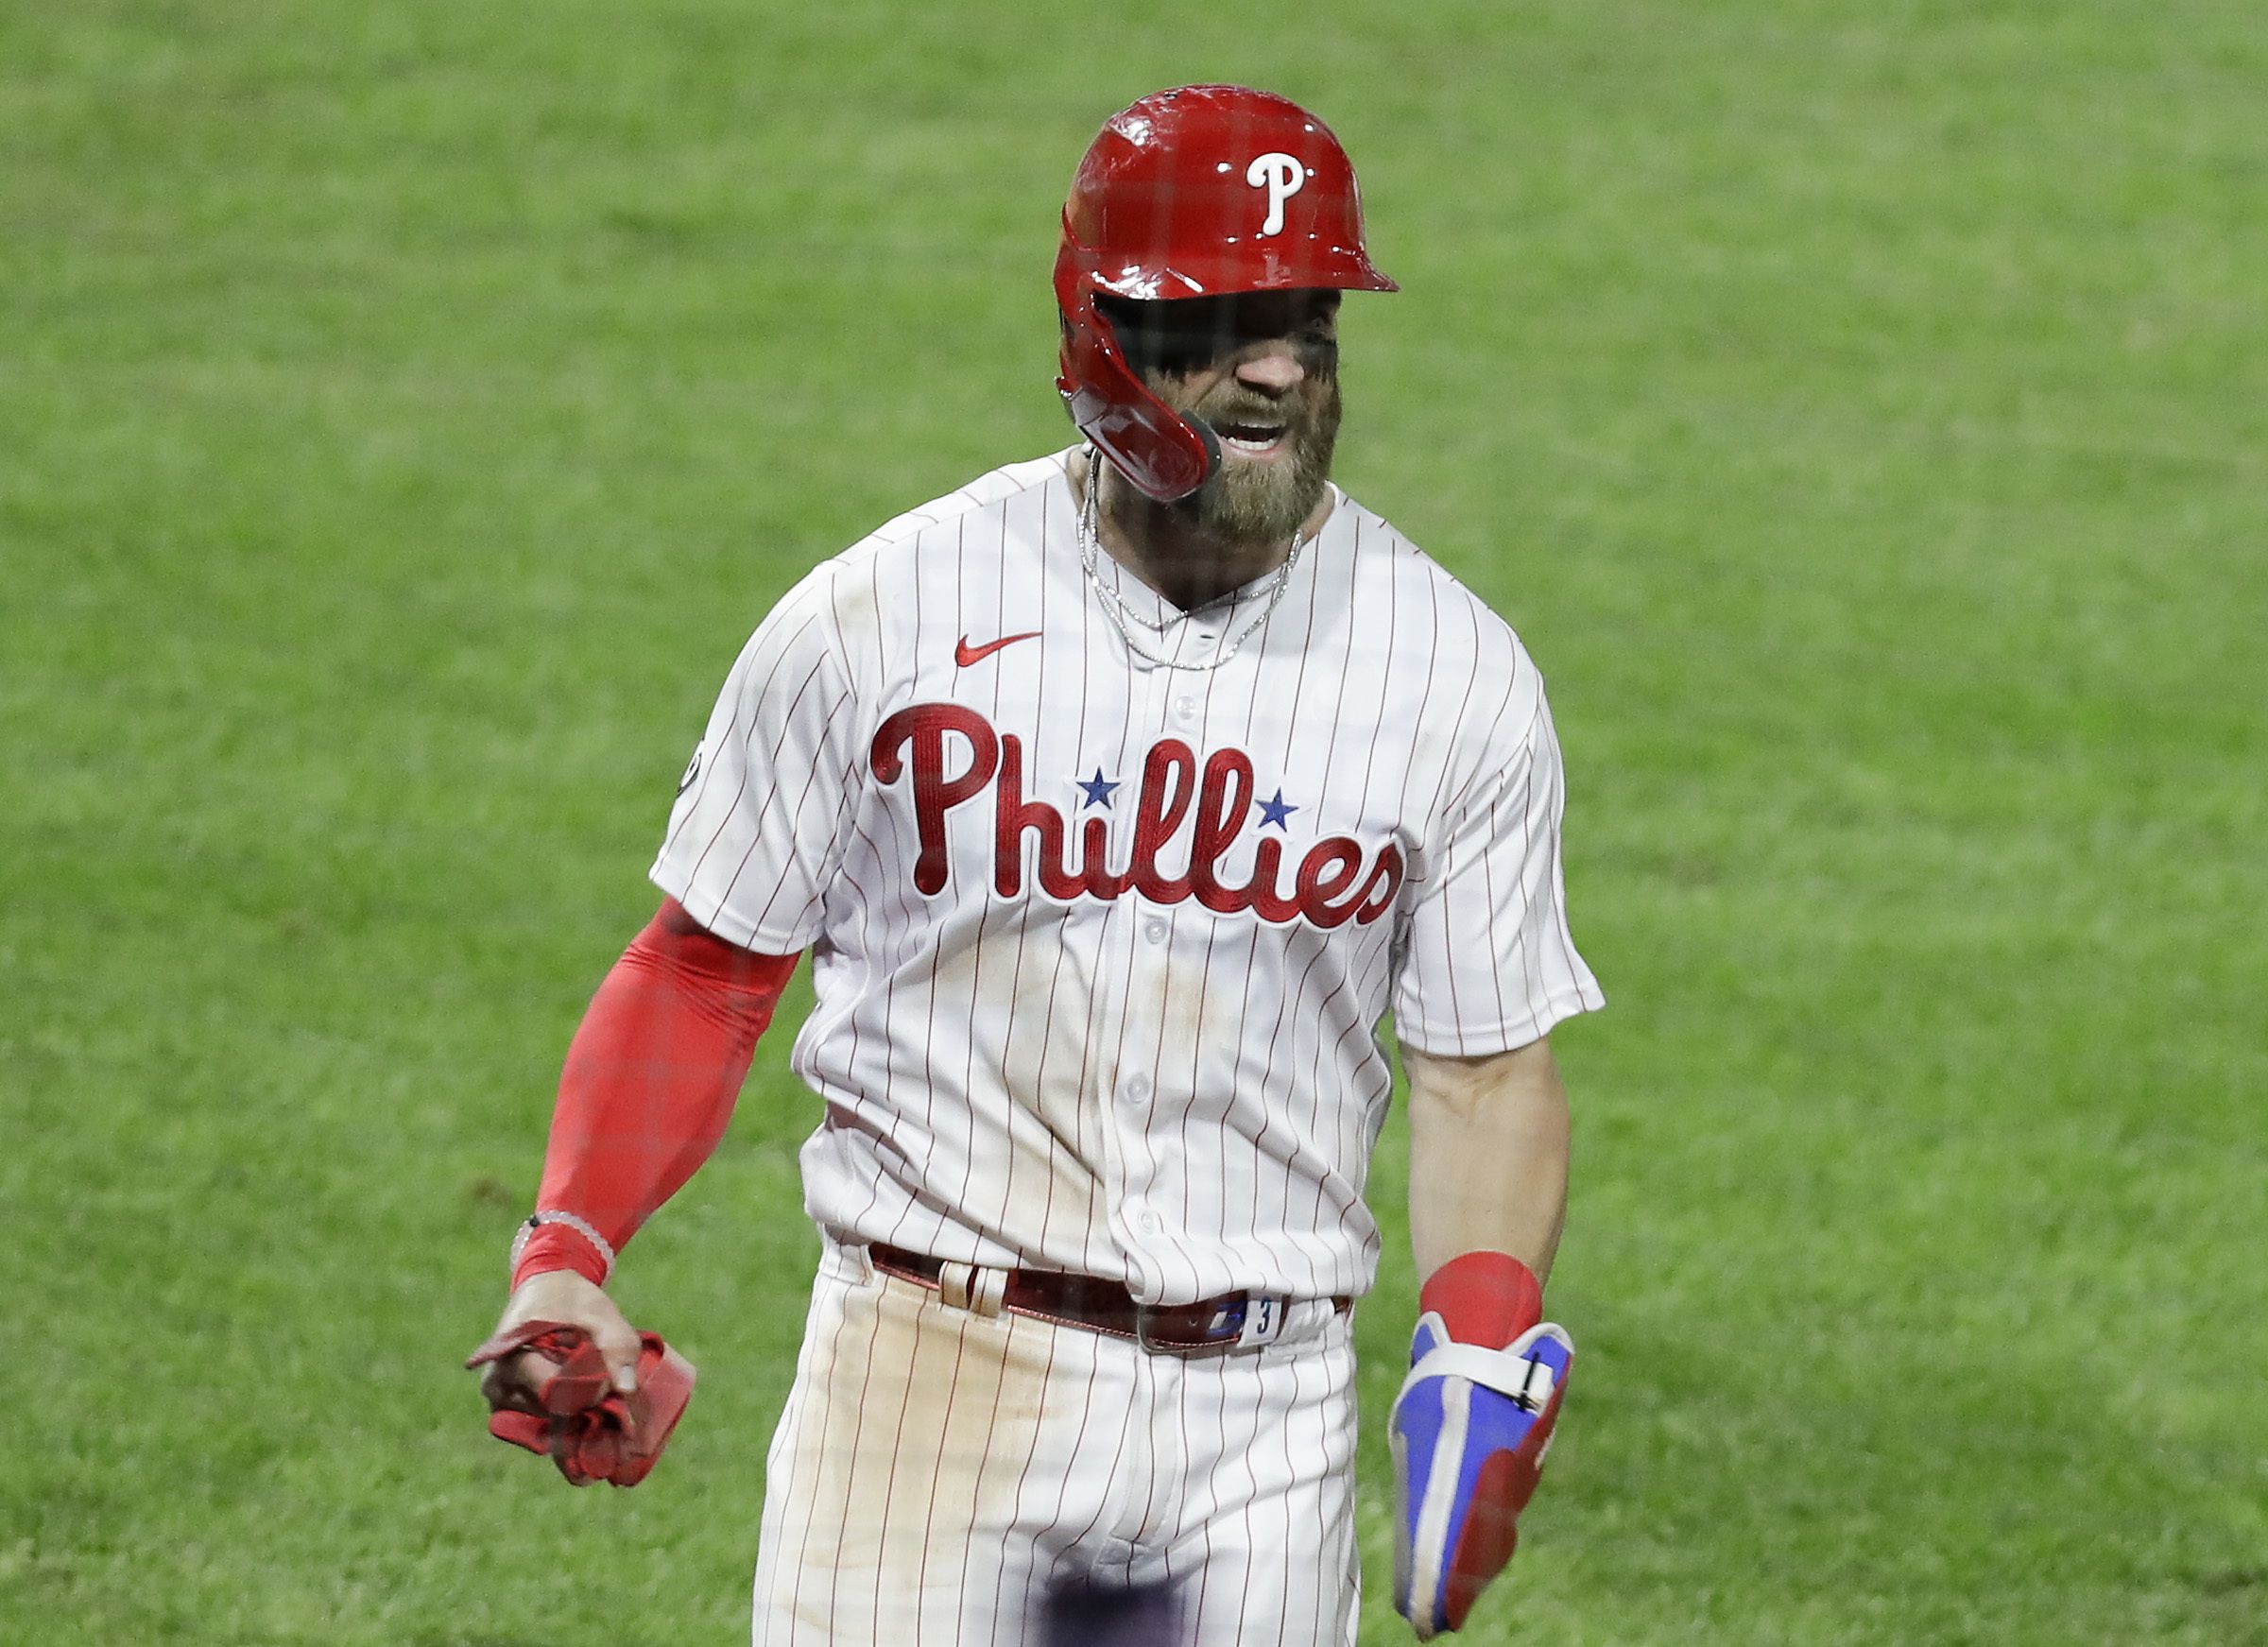 Phillies: Should Bryce Harper be a Gold Glove candidate?